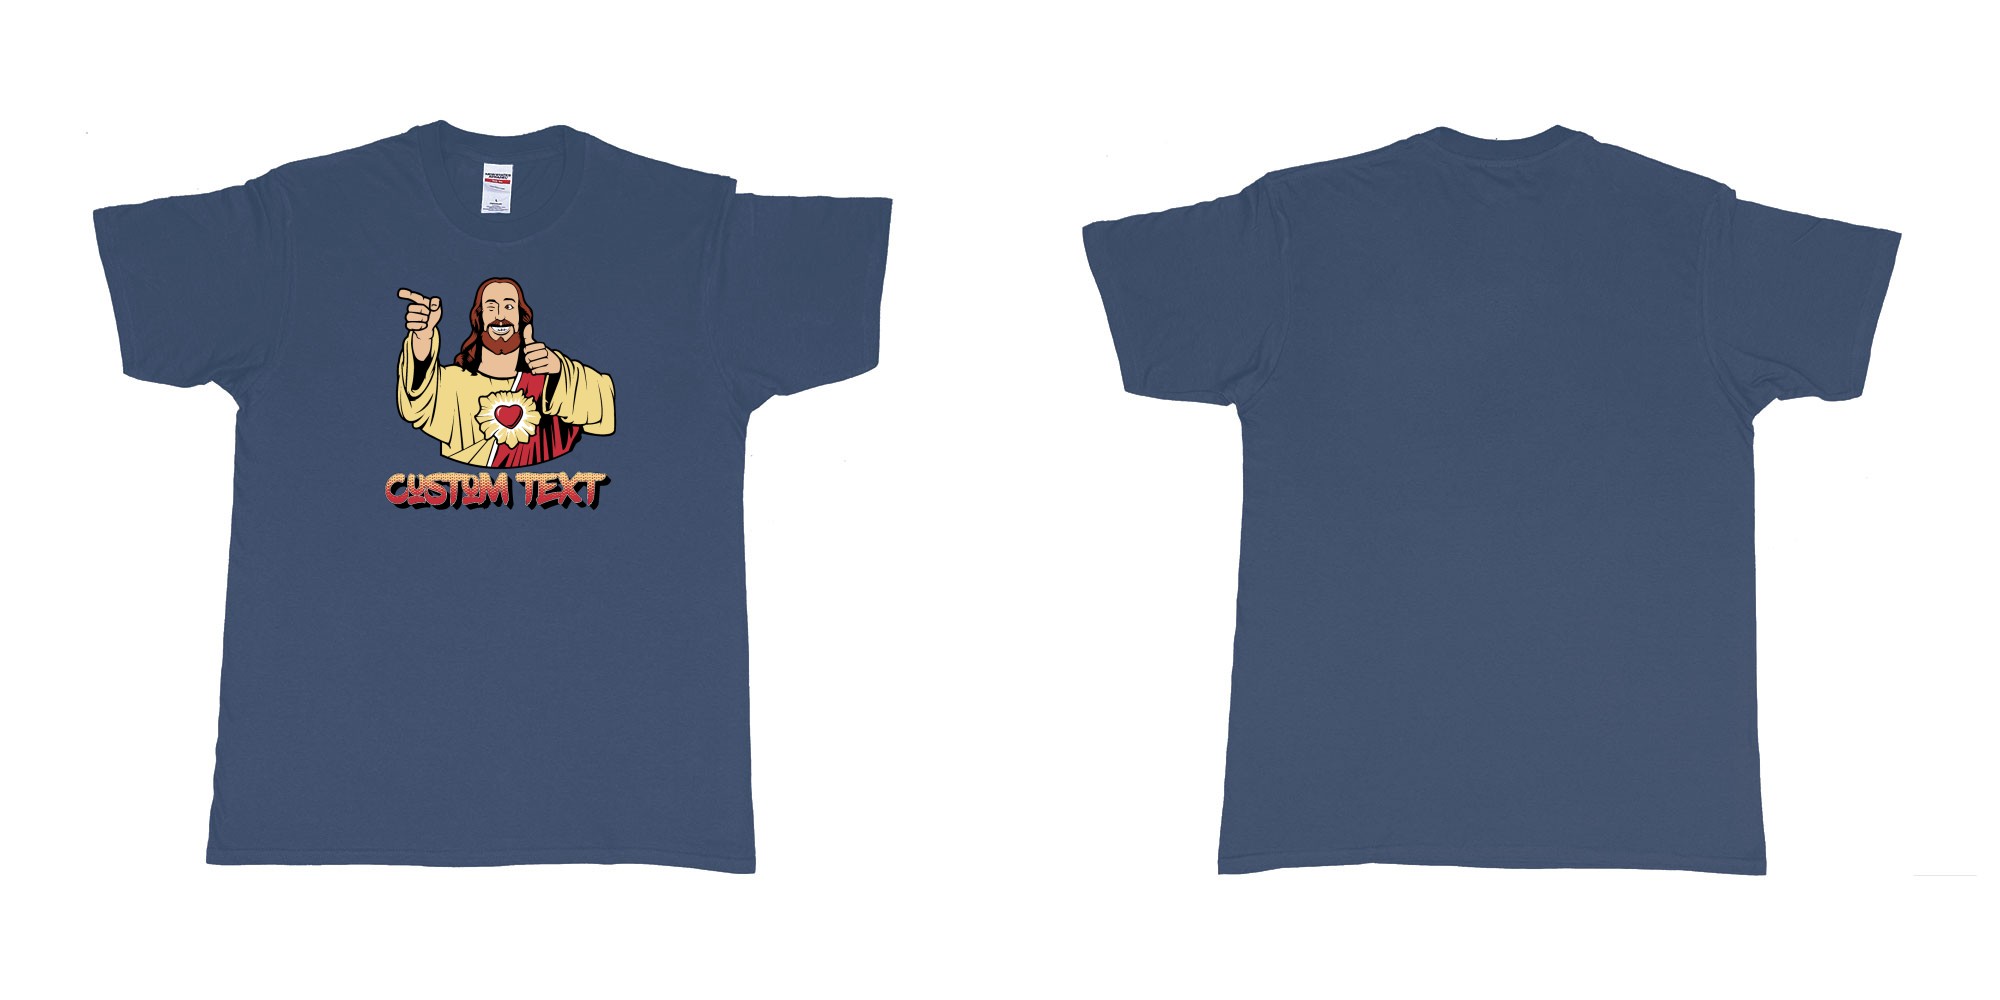 Custom tshirt design buddy christ custom text in fabric color navy choice your own text made in Bali by The Pirate Way